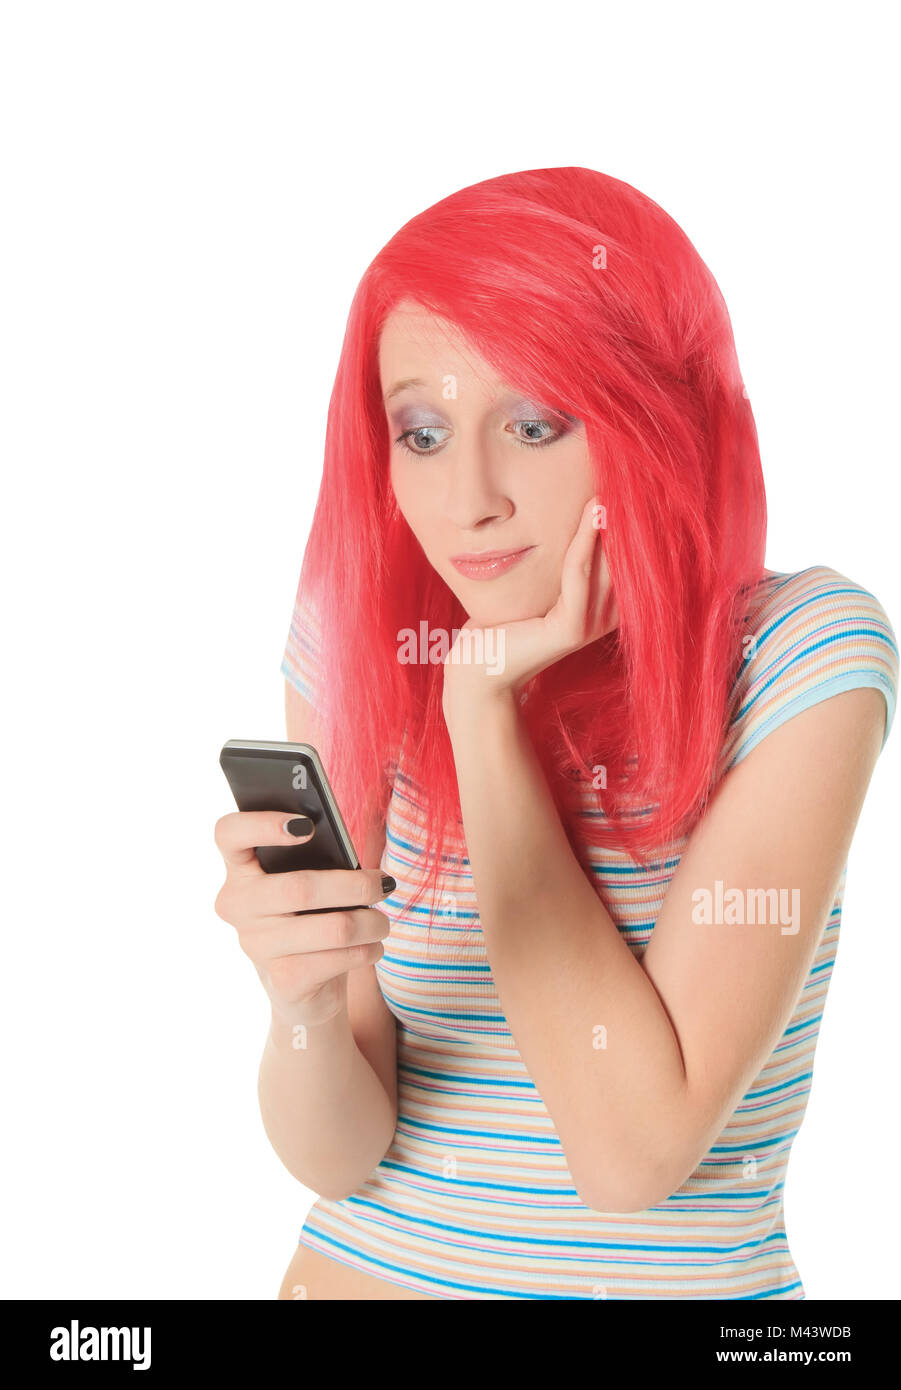 Bright picture of happy red hair woman with cell phone Stock Photo